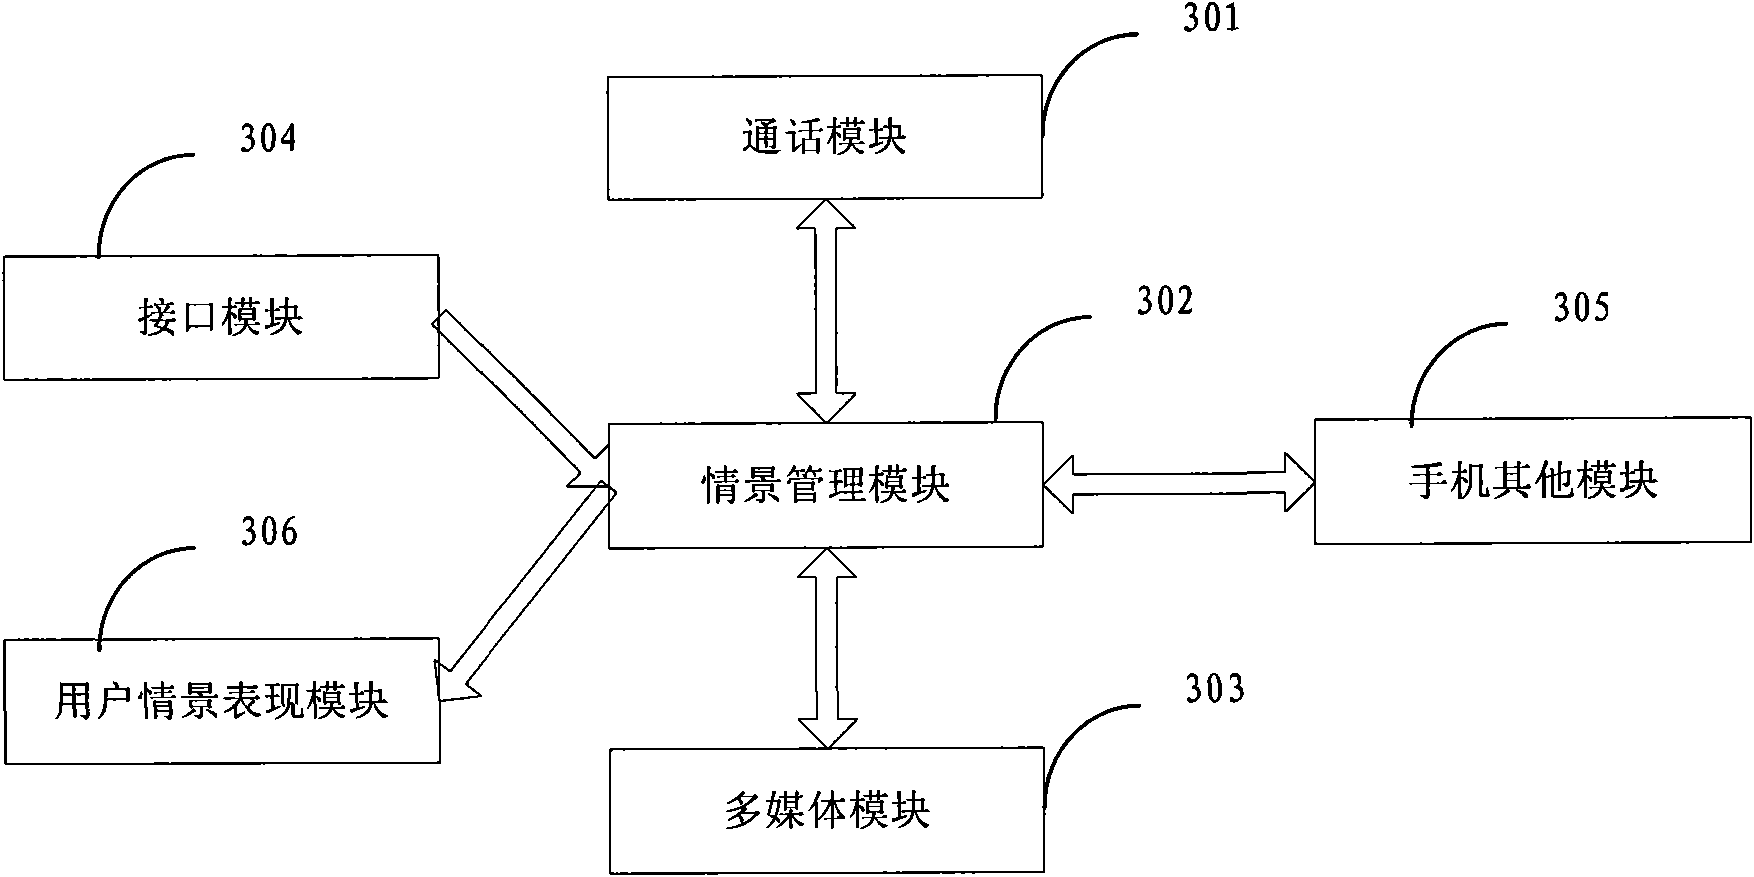 Method of mobile phone information cue and mobile phones